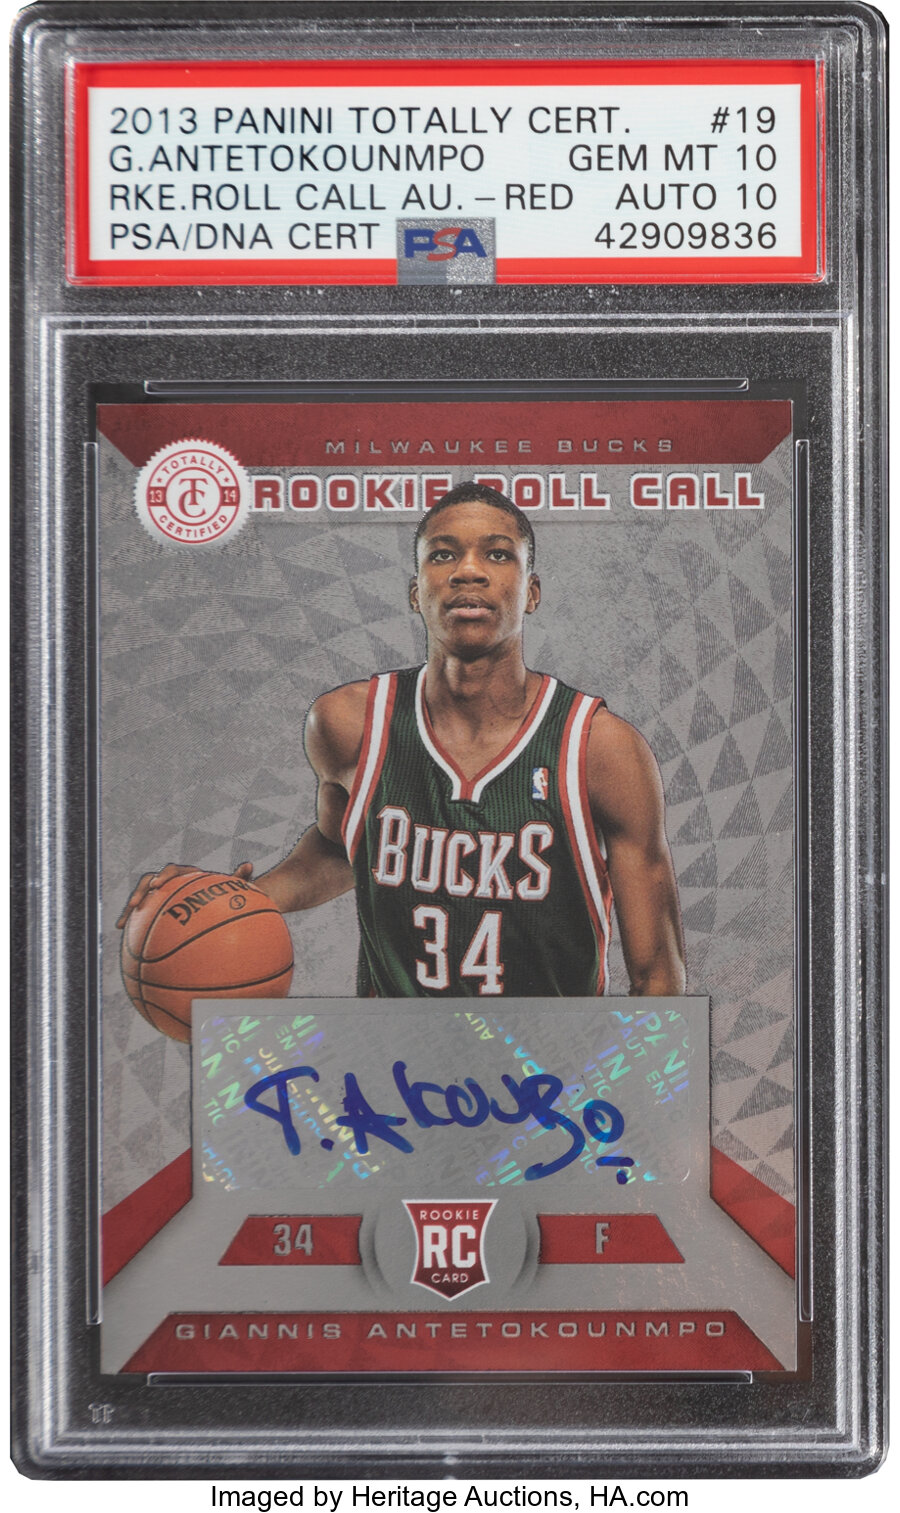 2013 Panini Totally Certified Giannis Antetokounmpo (Rookie Roll Call Autographs-Red) #19 PSA Gem Mint 10, Auto 10 - #35/99